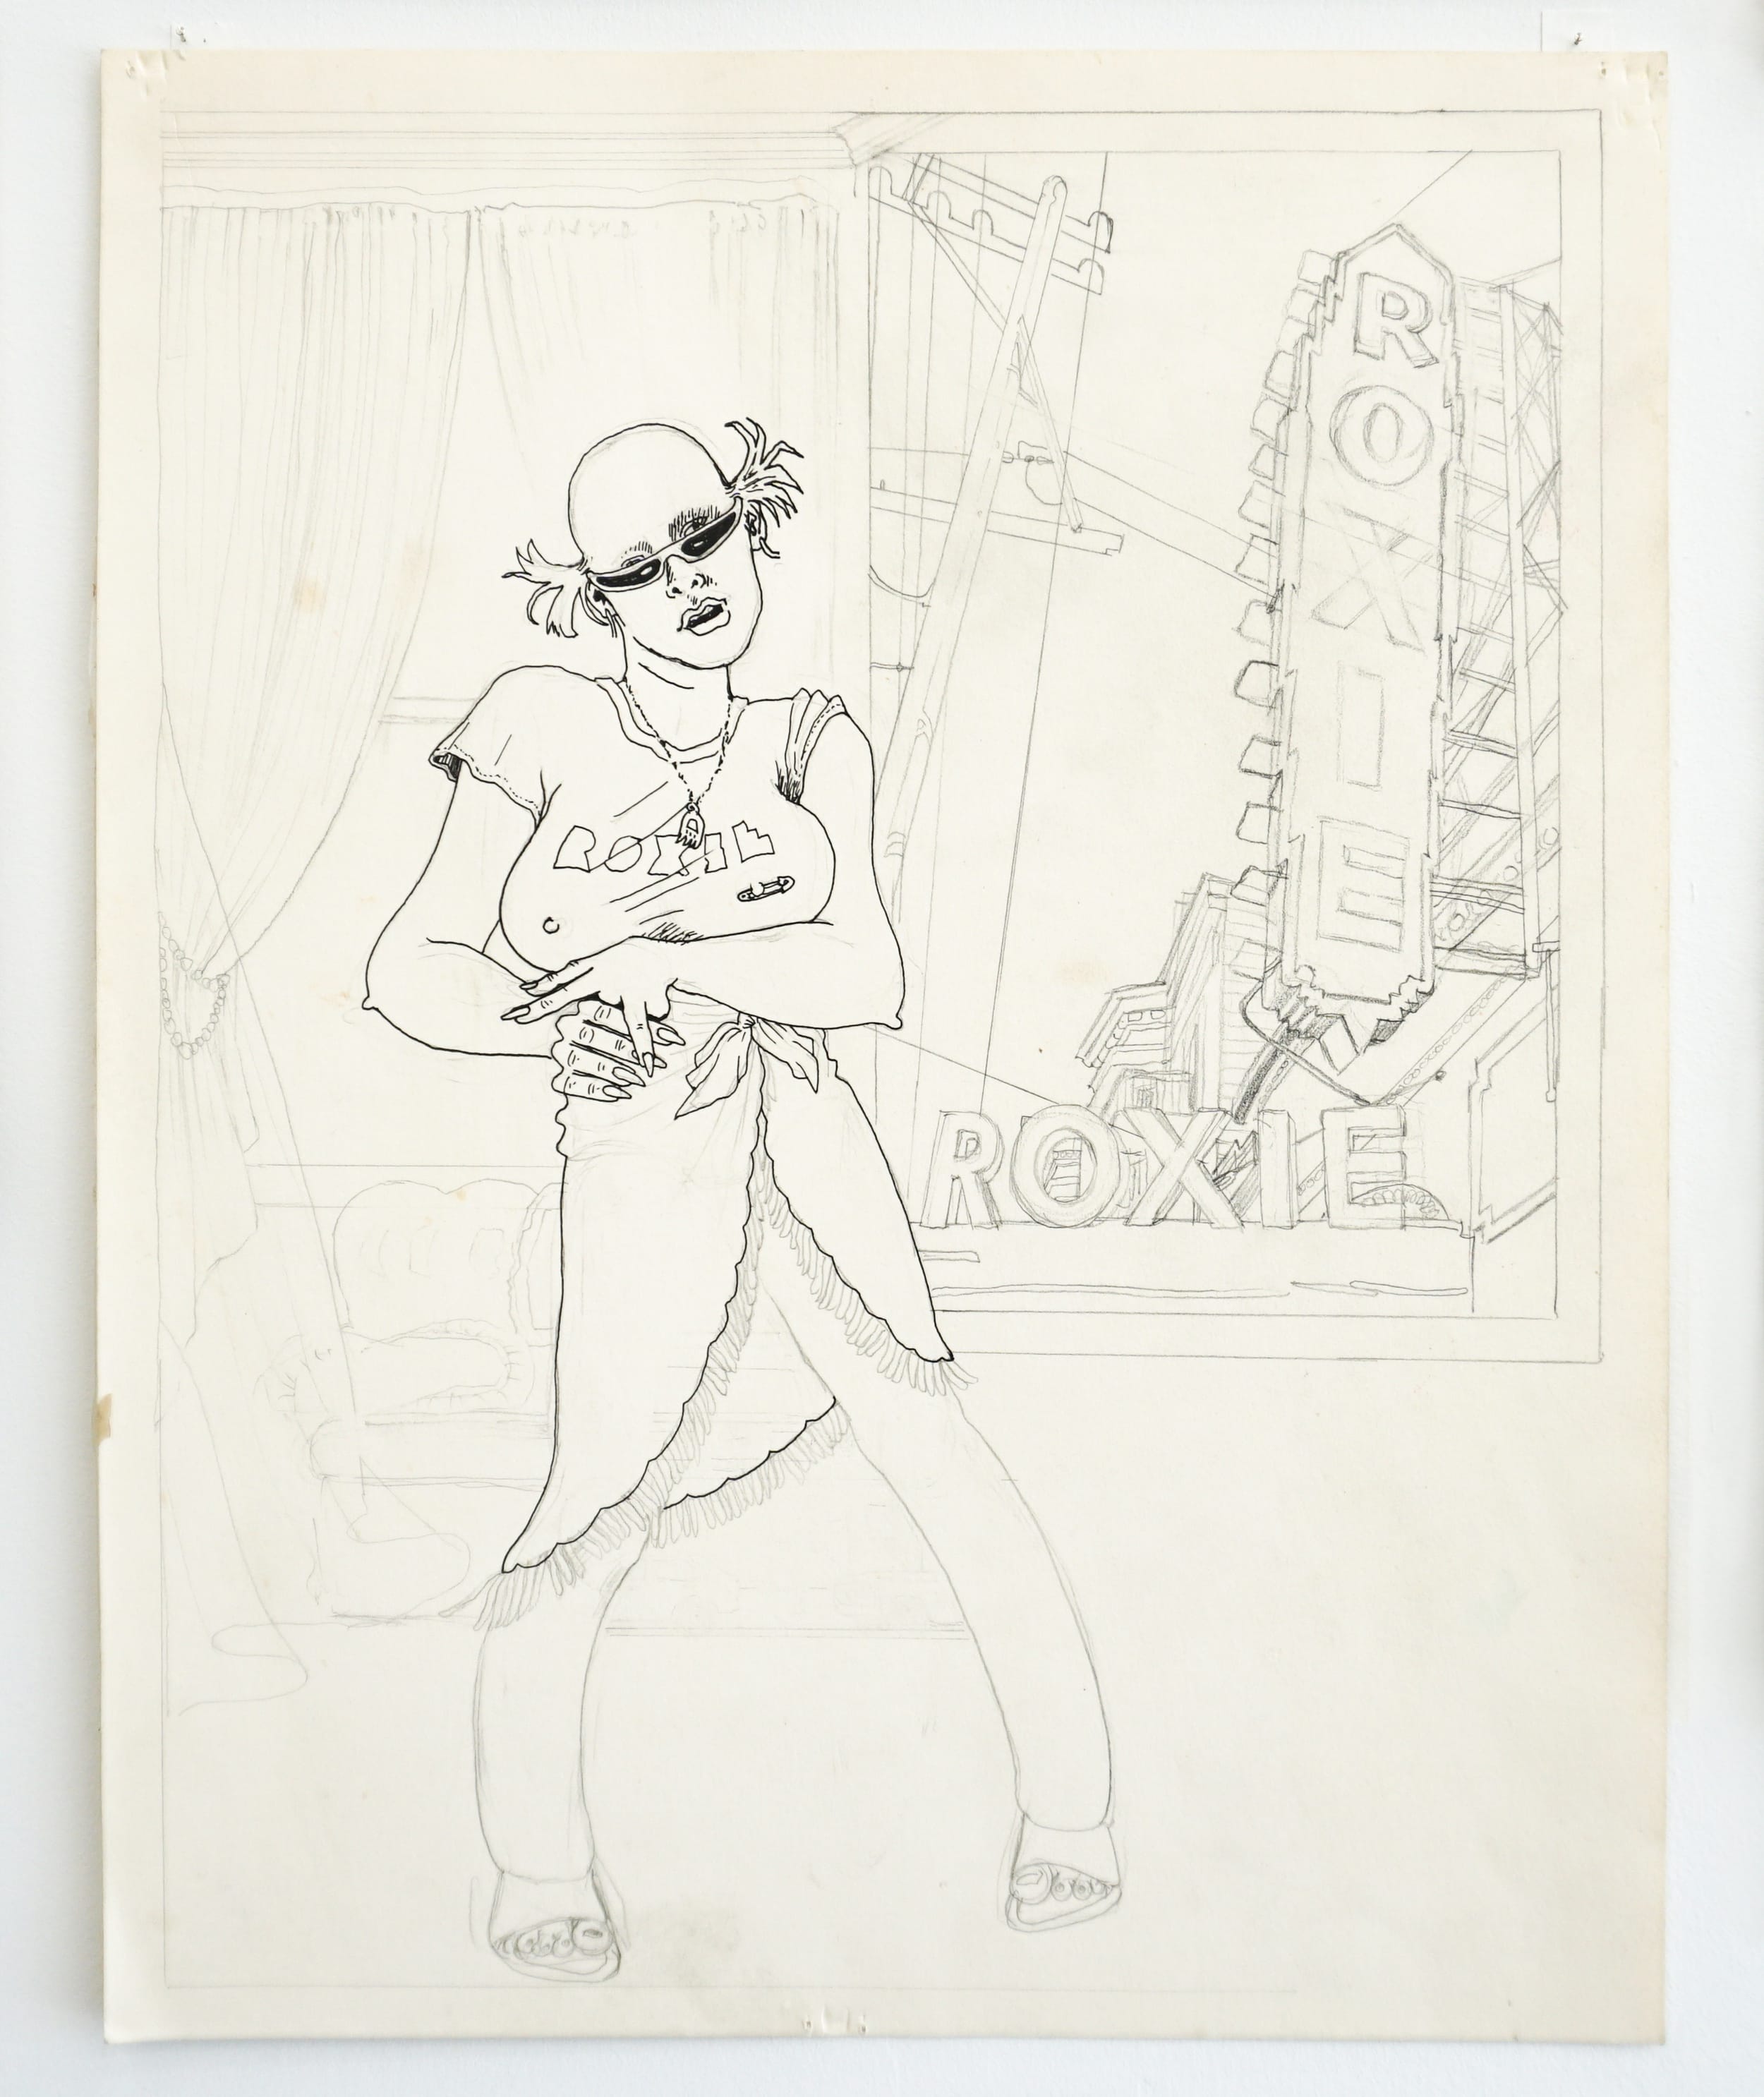  Curt McDowell  Untitled (Loretta, The Roxie) , date unknown Graphite and ink on paper 14 x 11 inches 